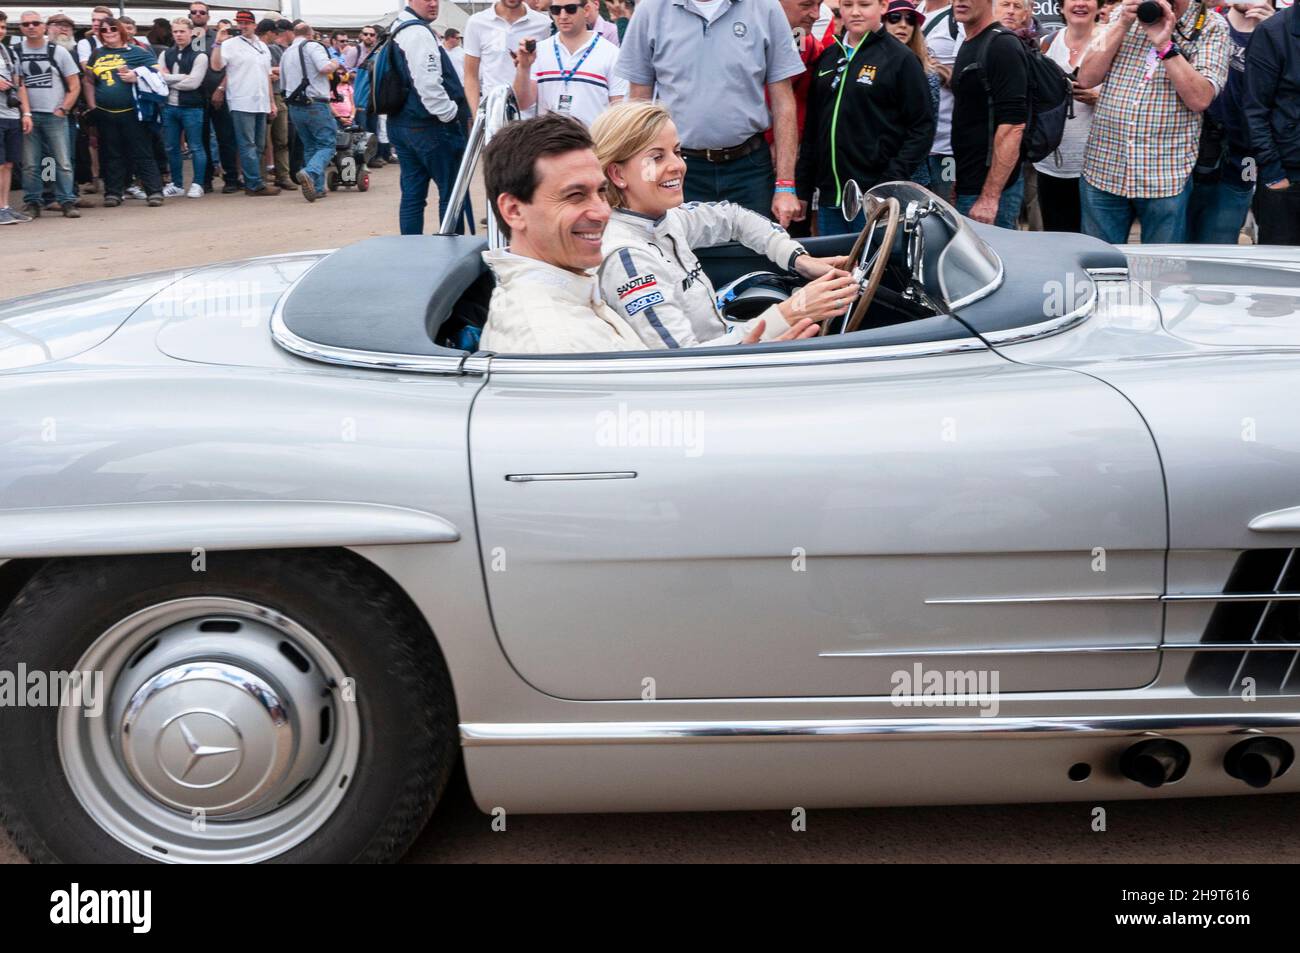 Toto Wolff and Susie Wolff at Goodwood Festival of Speed, UK, 2016, driving a Mercedes-Benz 300 SL through the crowd Stock Photo